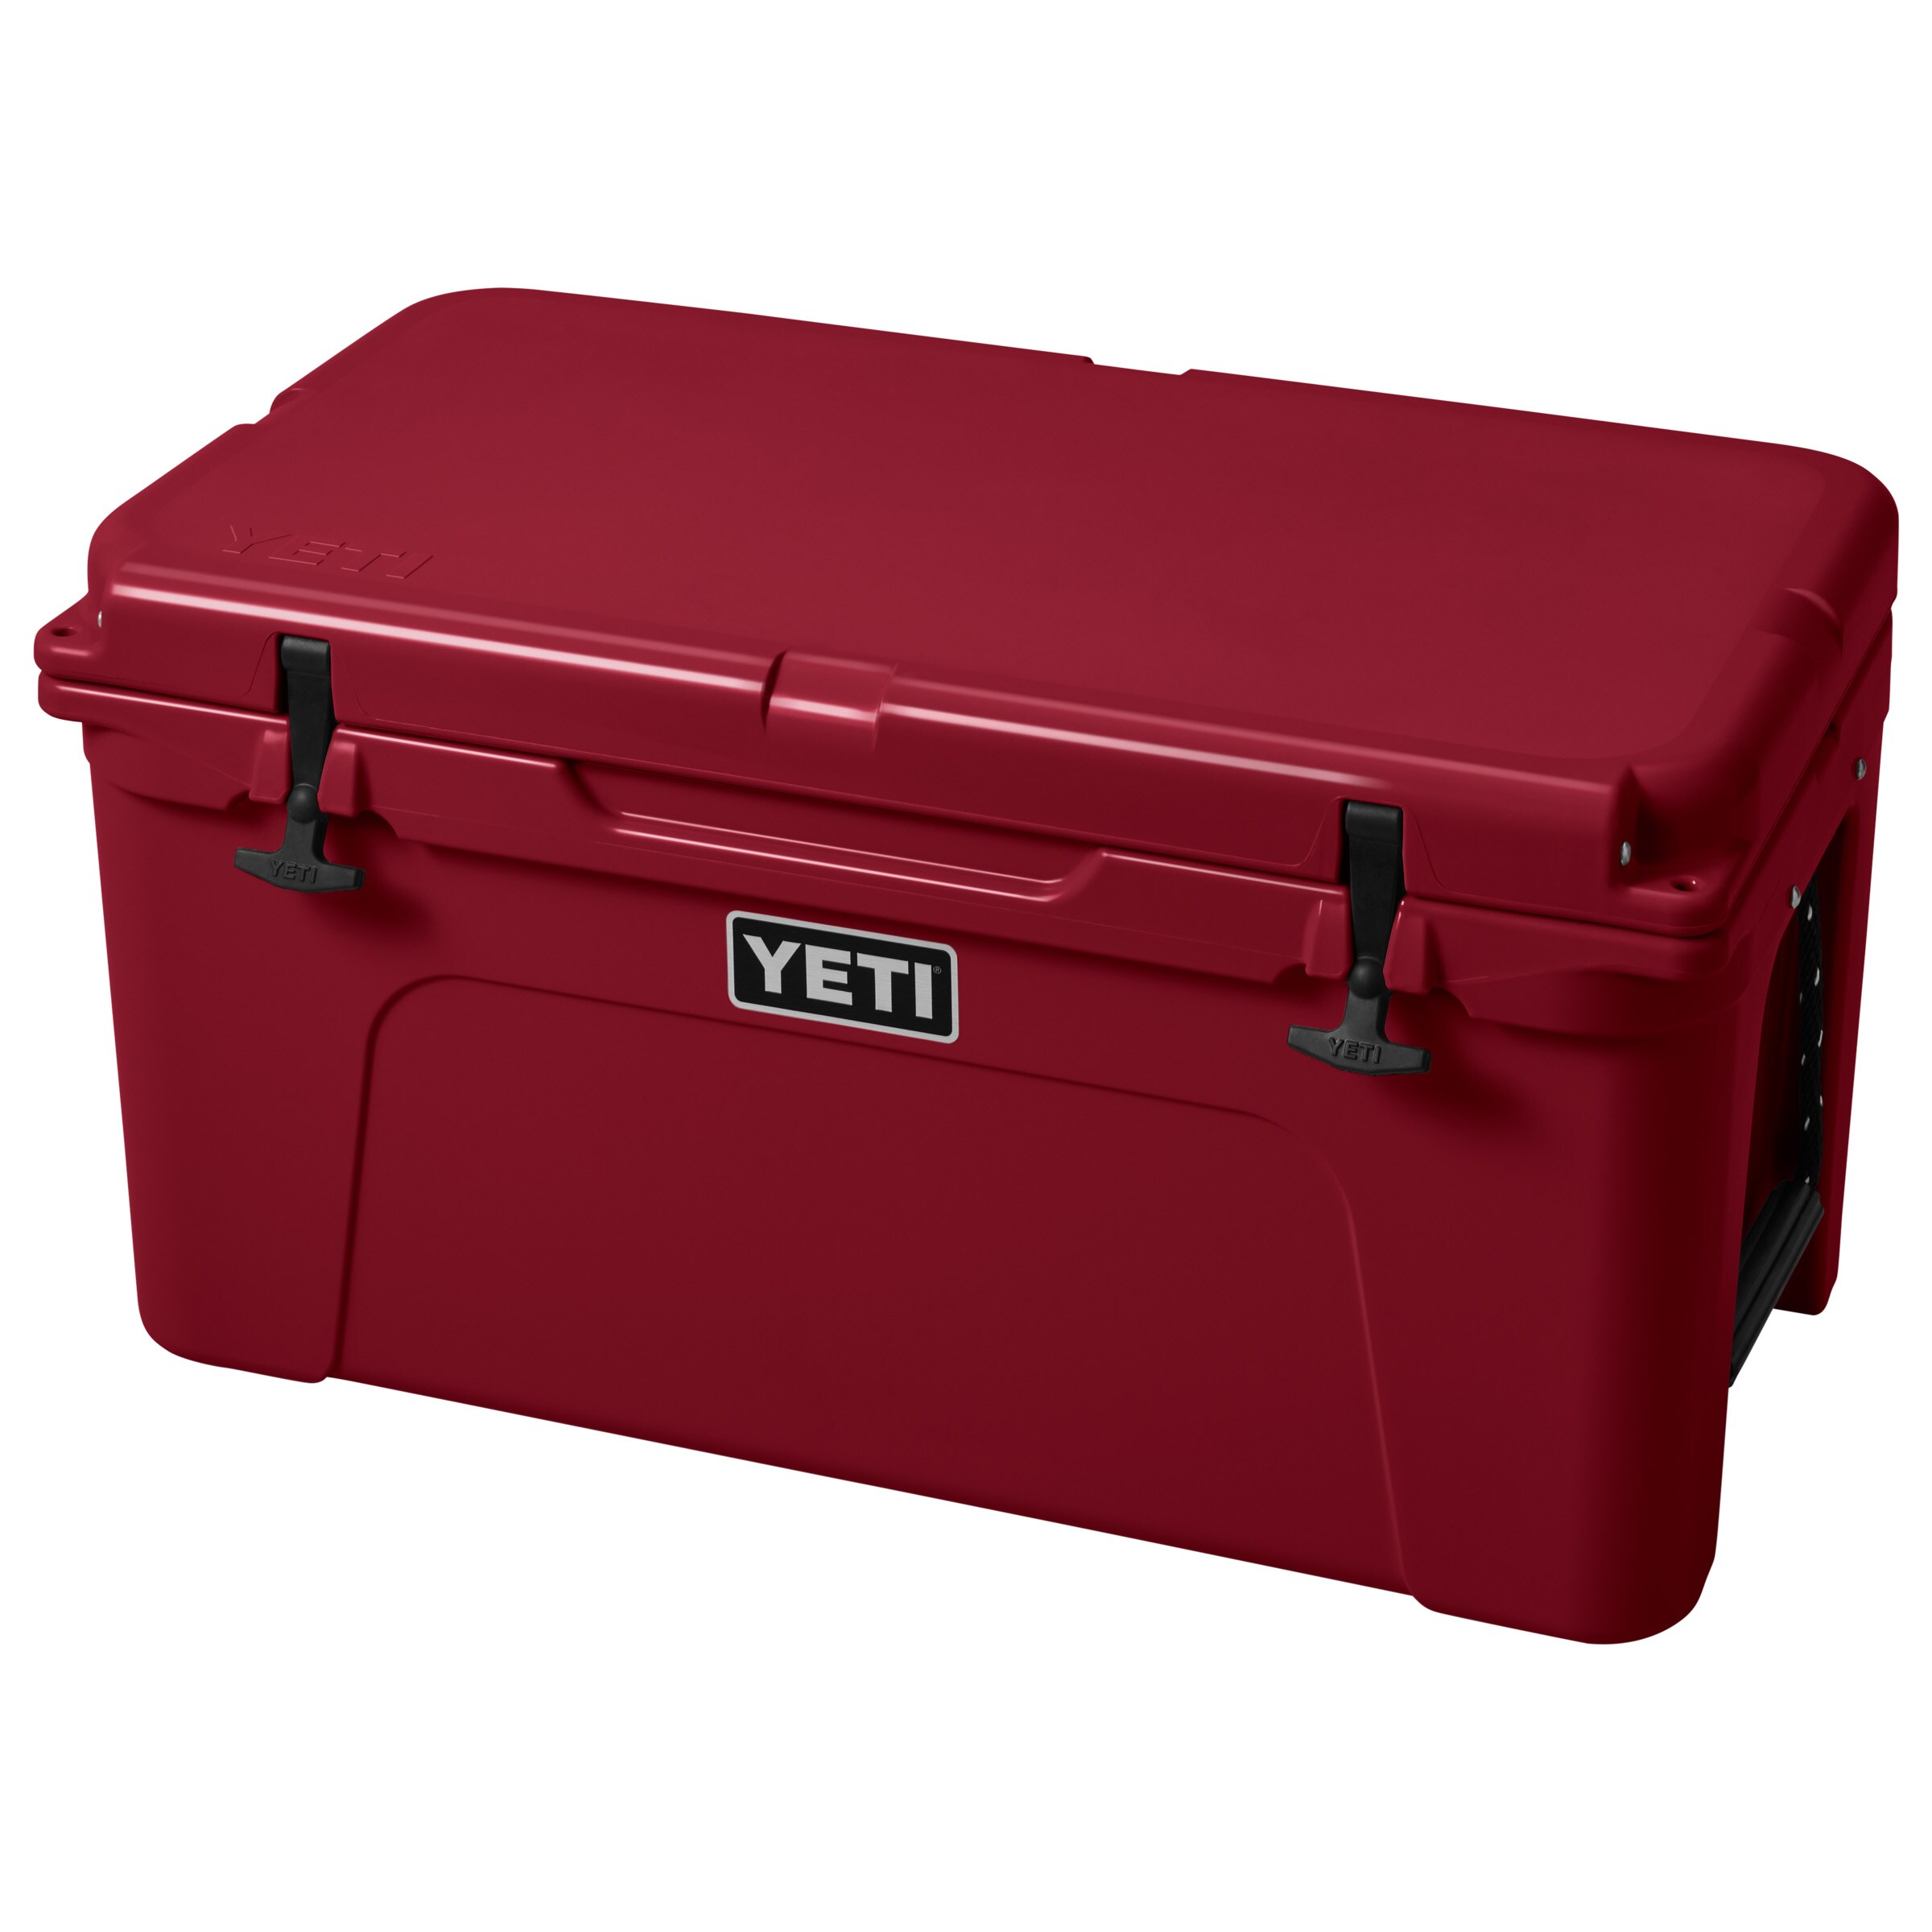 YETI Tundra 65 Insulated Chest Cooler, Harvest Red at Lowes.com